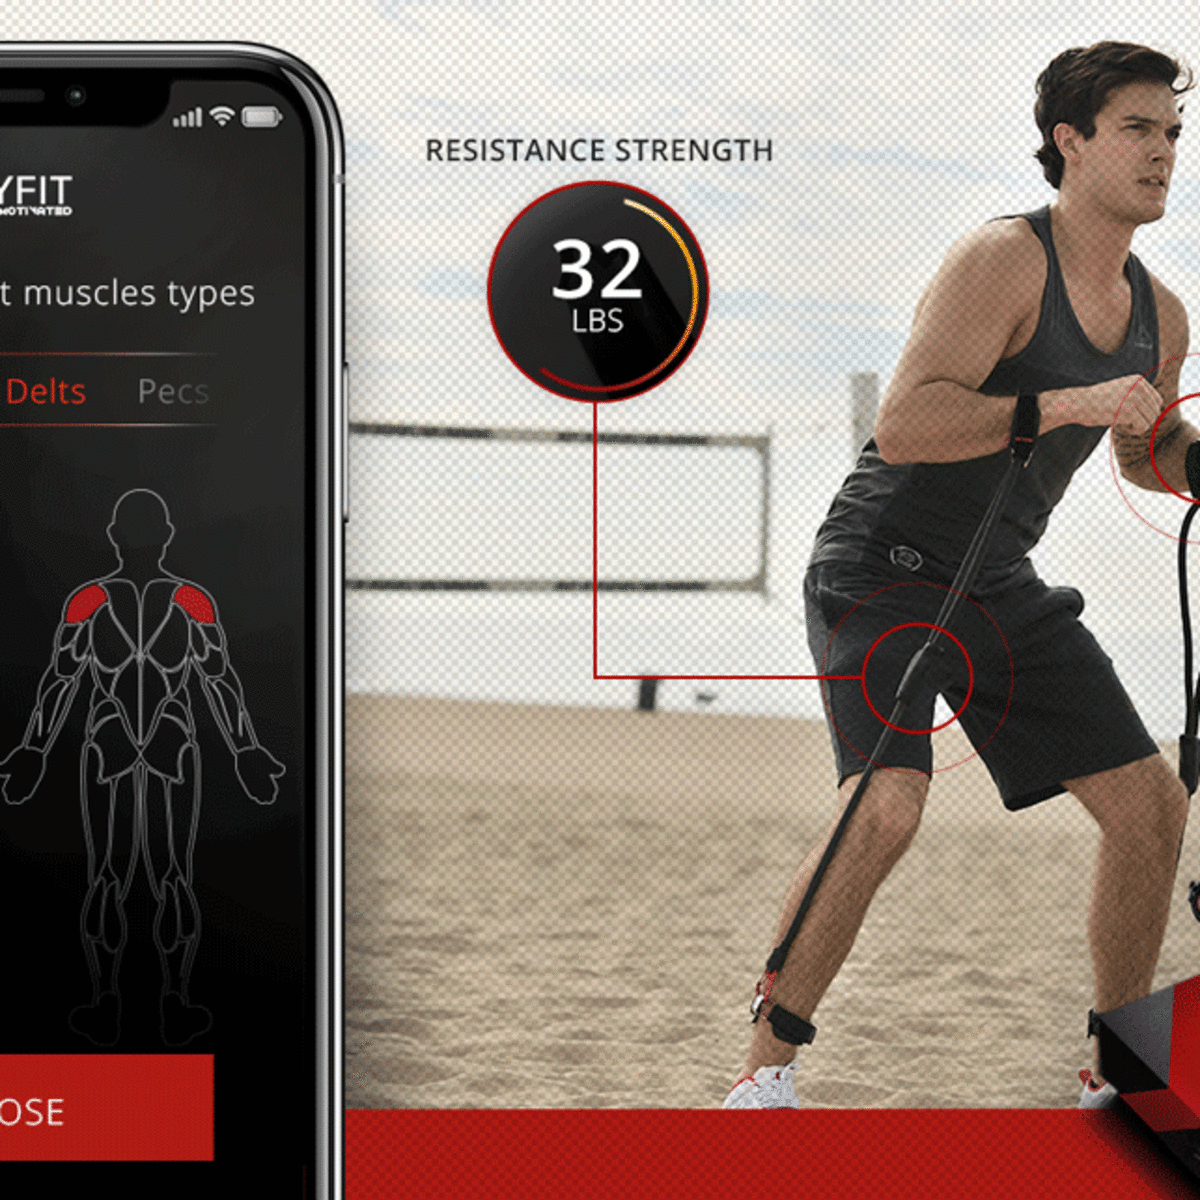 LA-Based Startup Brings Innovative Wearable Gym and Fitness Tracker to - The Street - C-Suite